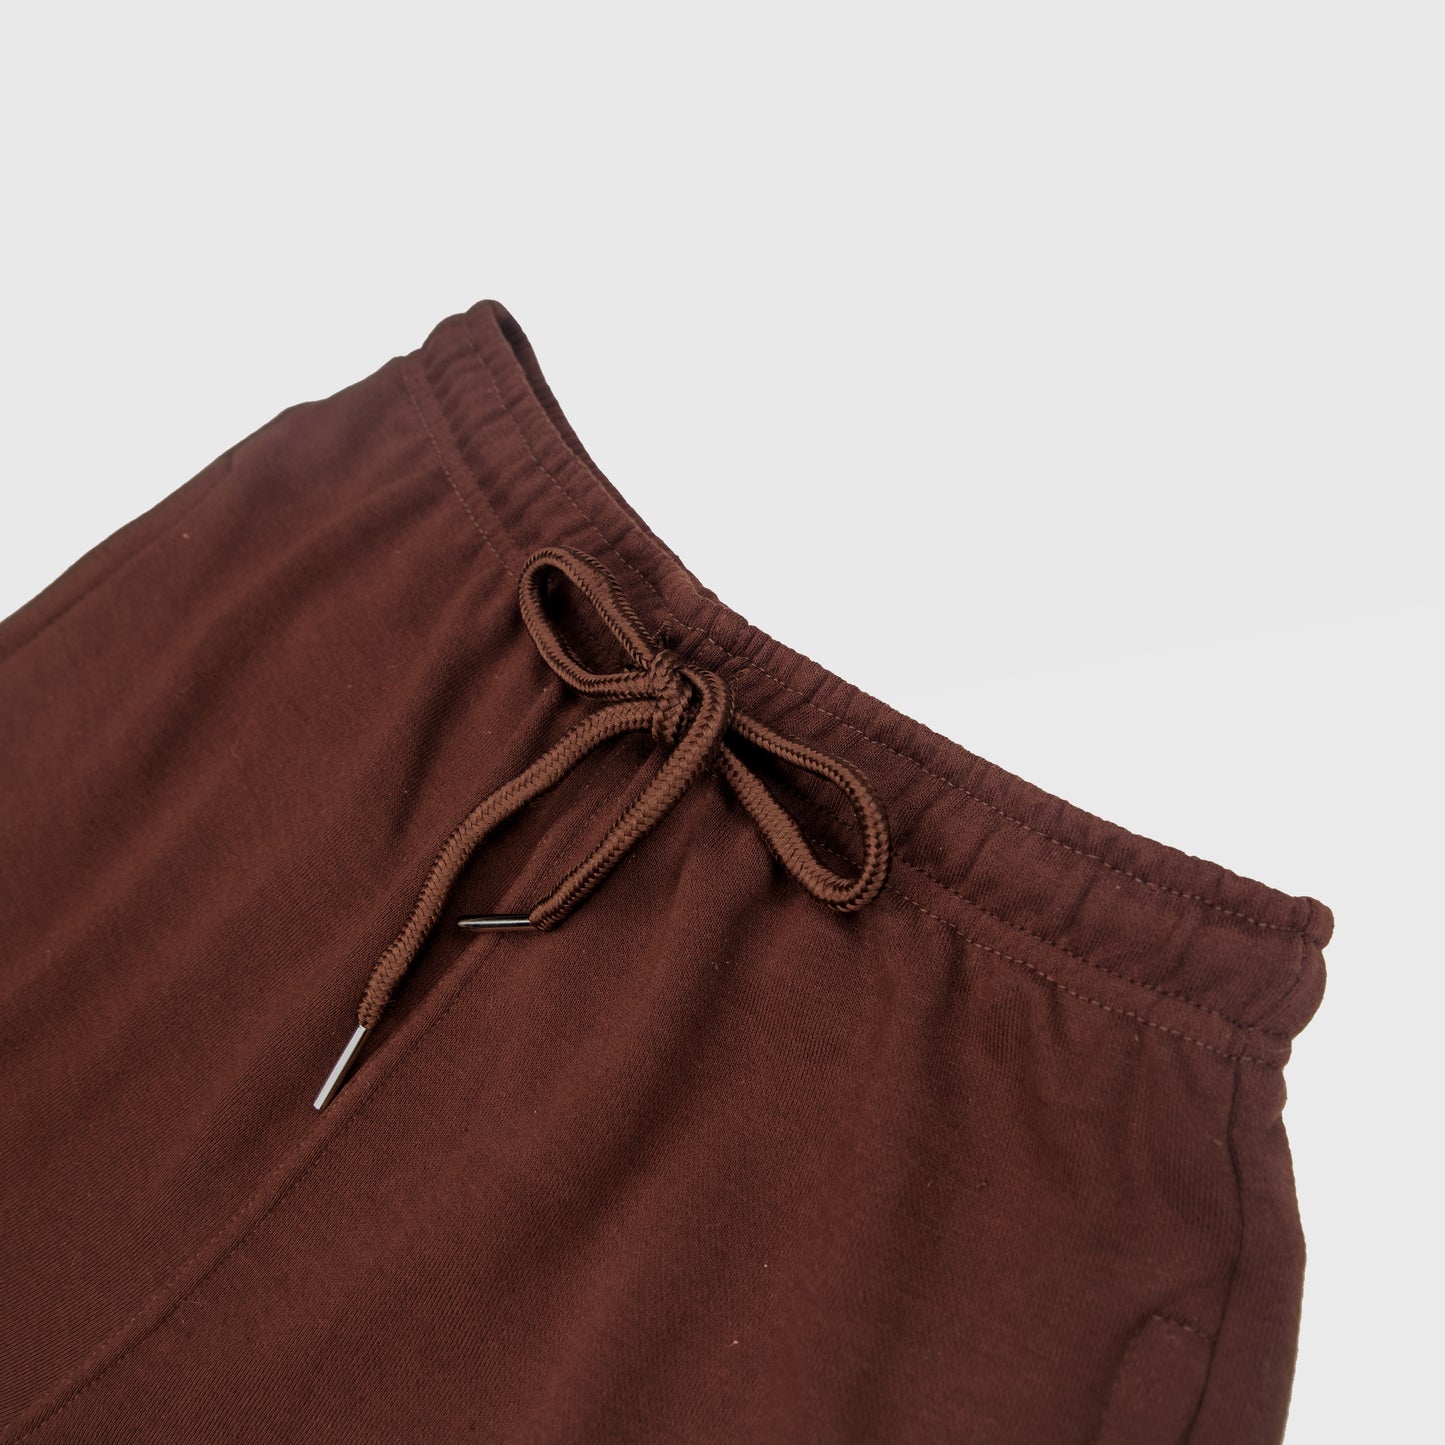 CHOCOLATE SOLID SWEAT SHORTS WITH BROWN TERK EMBROIDERED LOGO